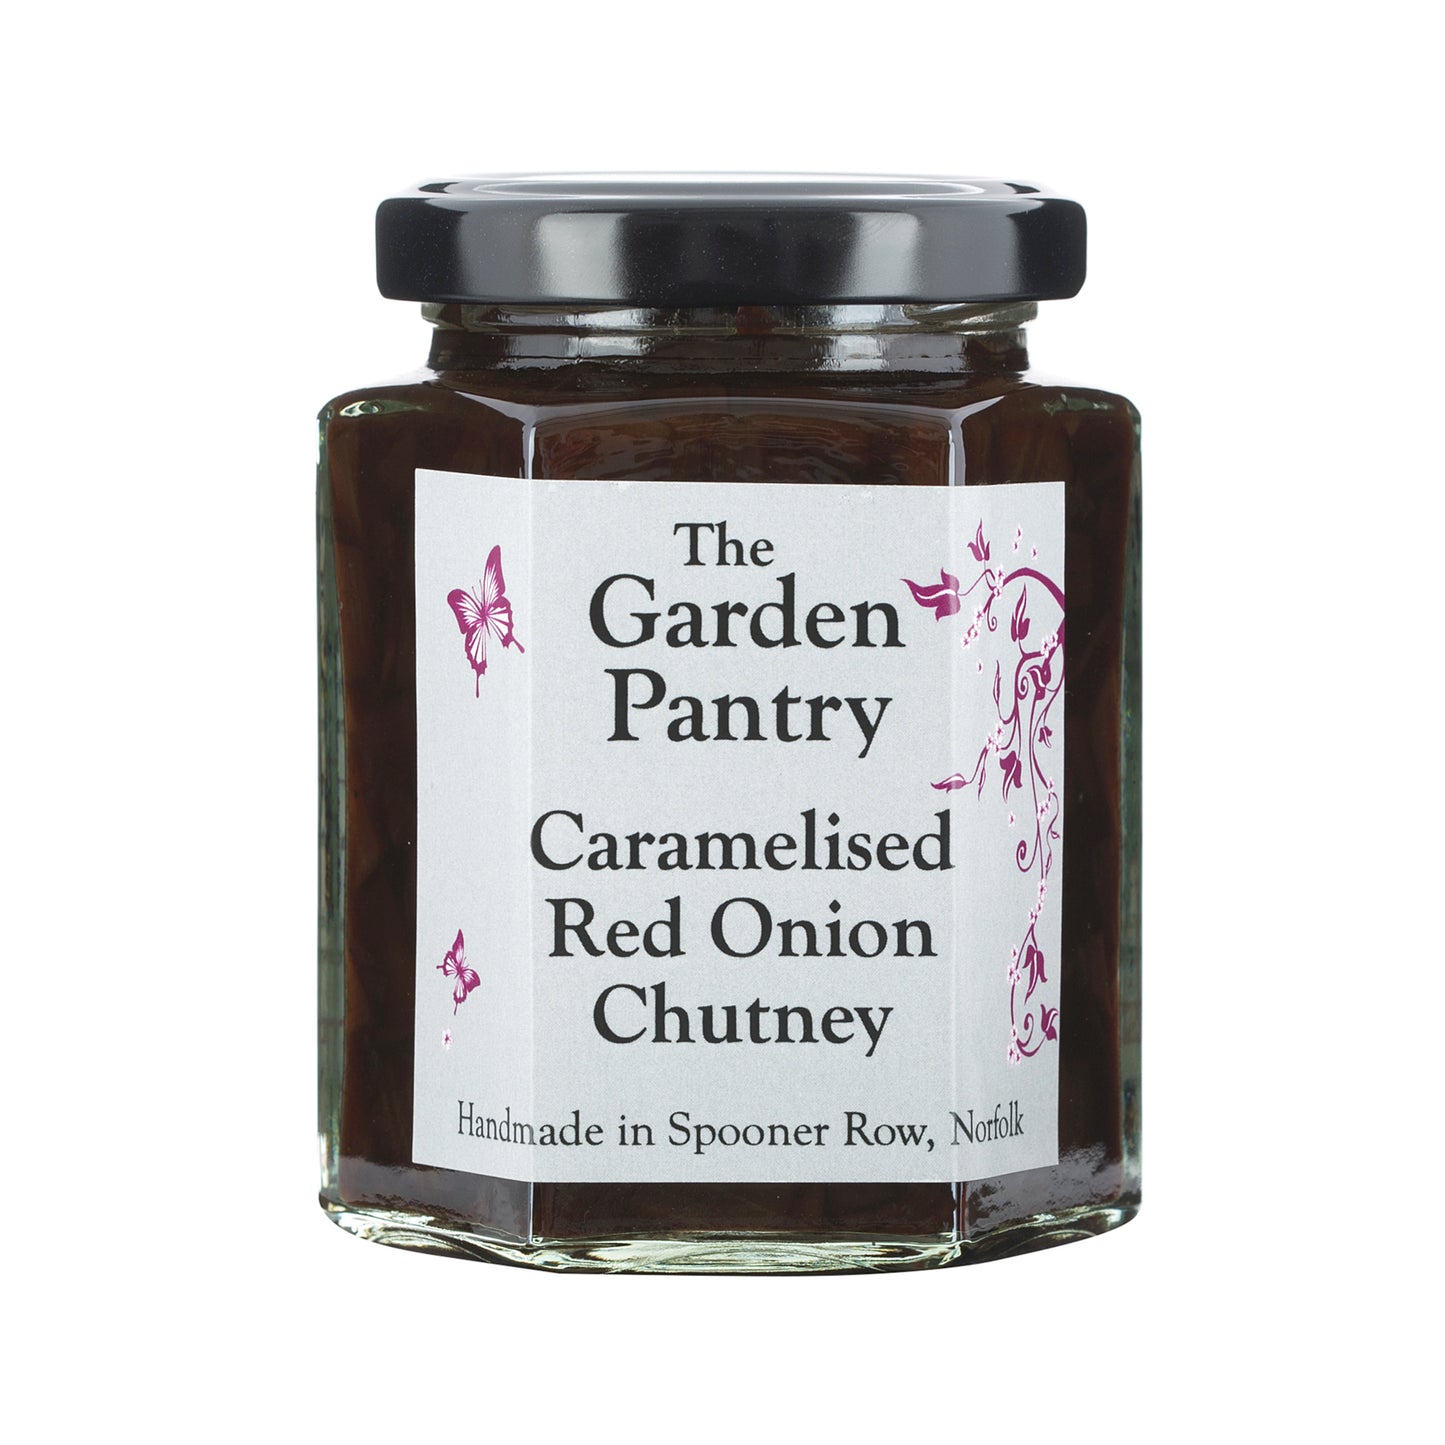 The Garden Pantry Caramelised Red Onion Chutney